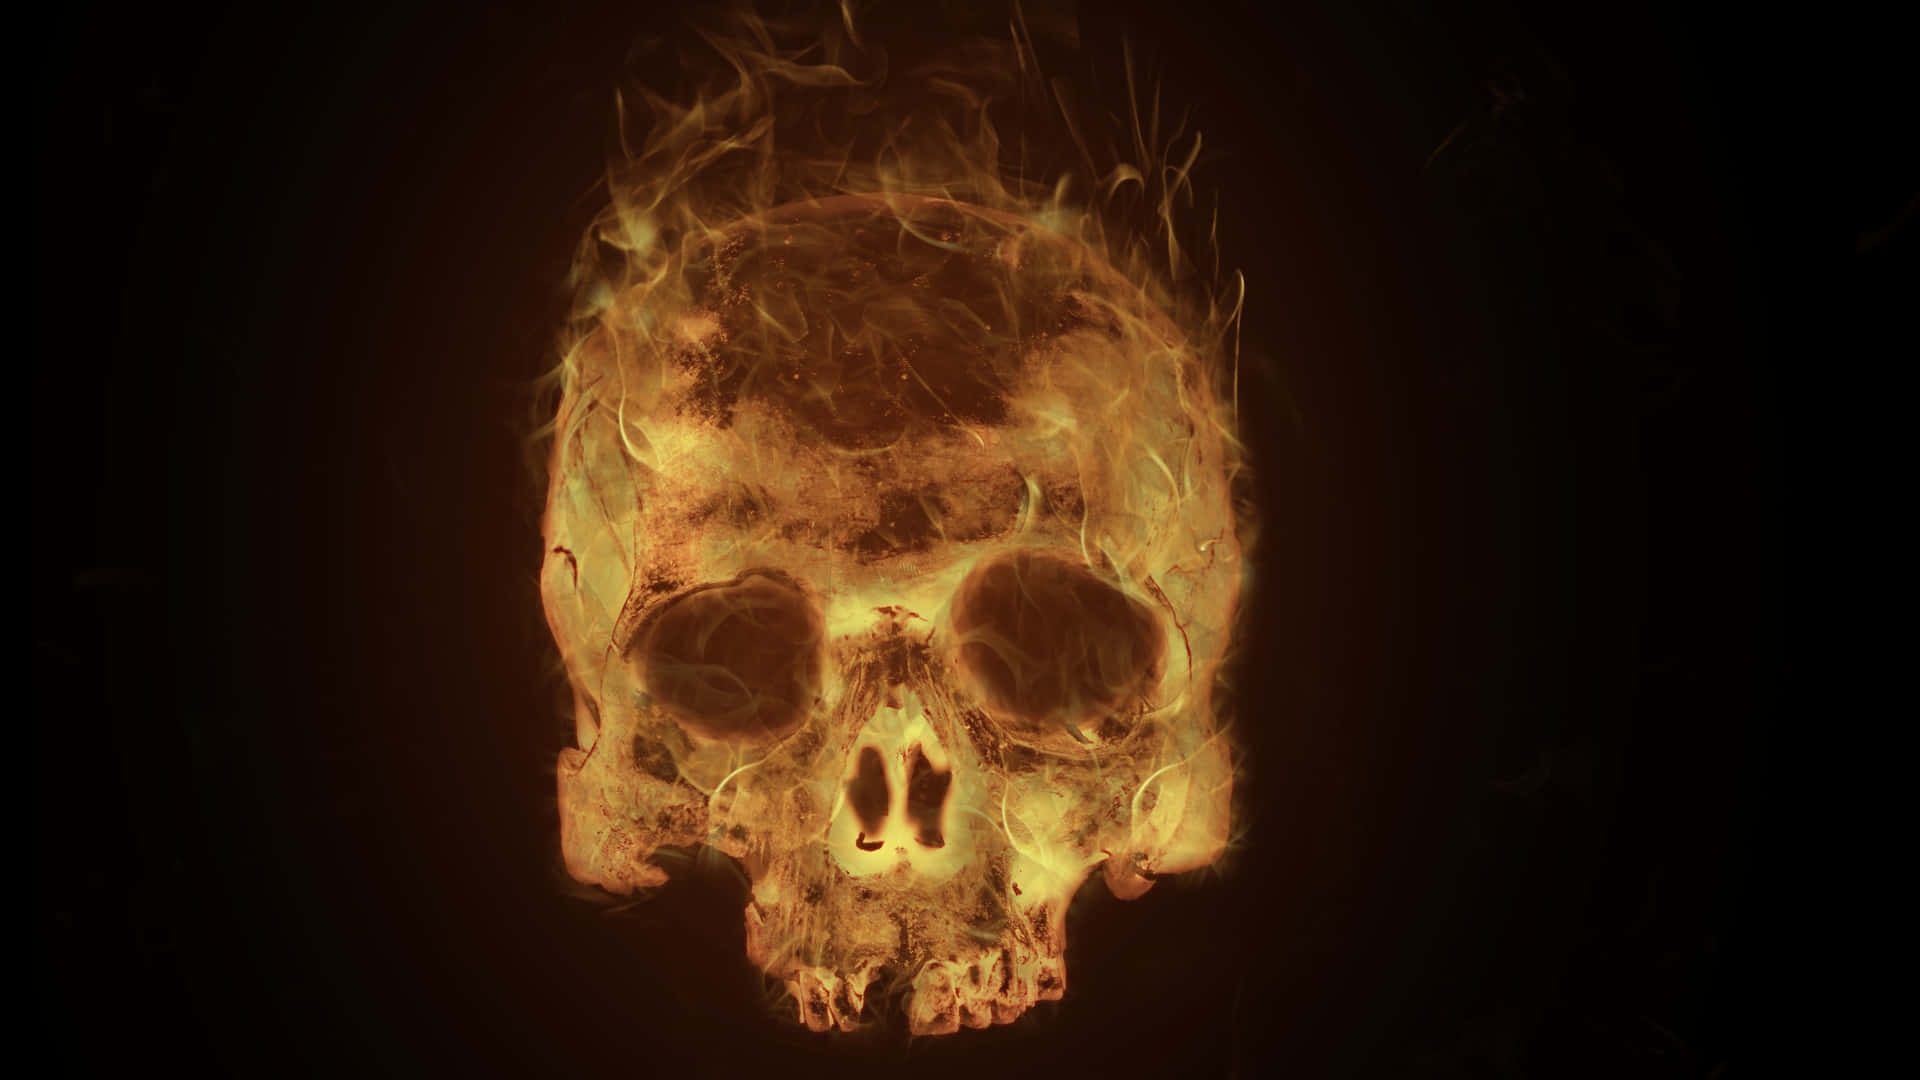 A Flaming Skull Brought to Life Wallpaper